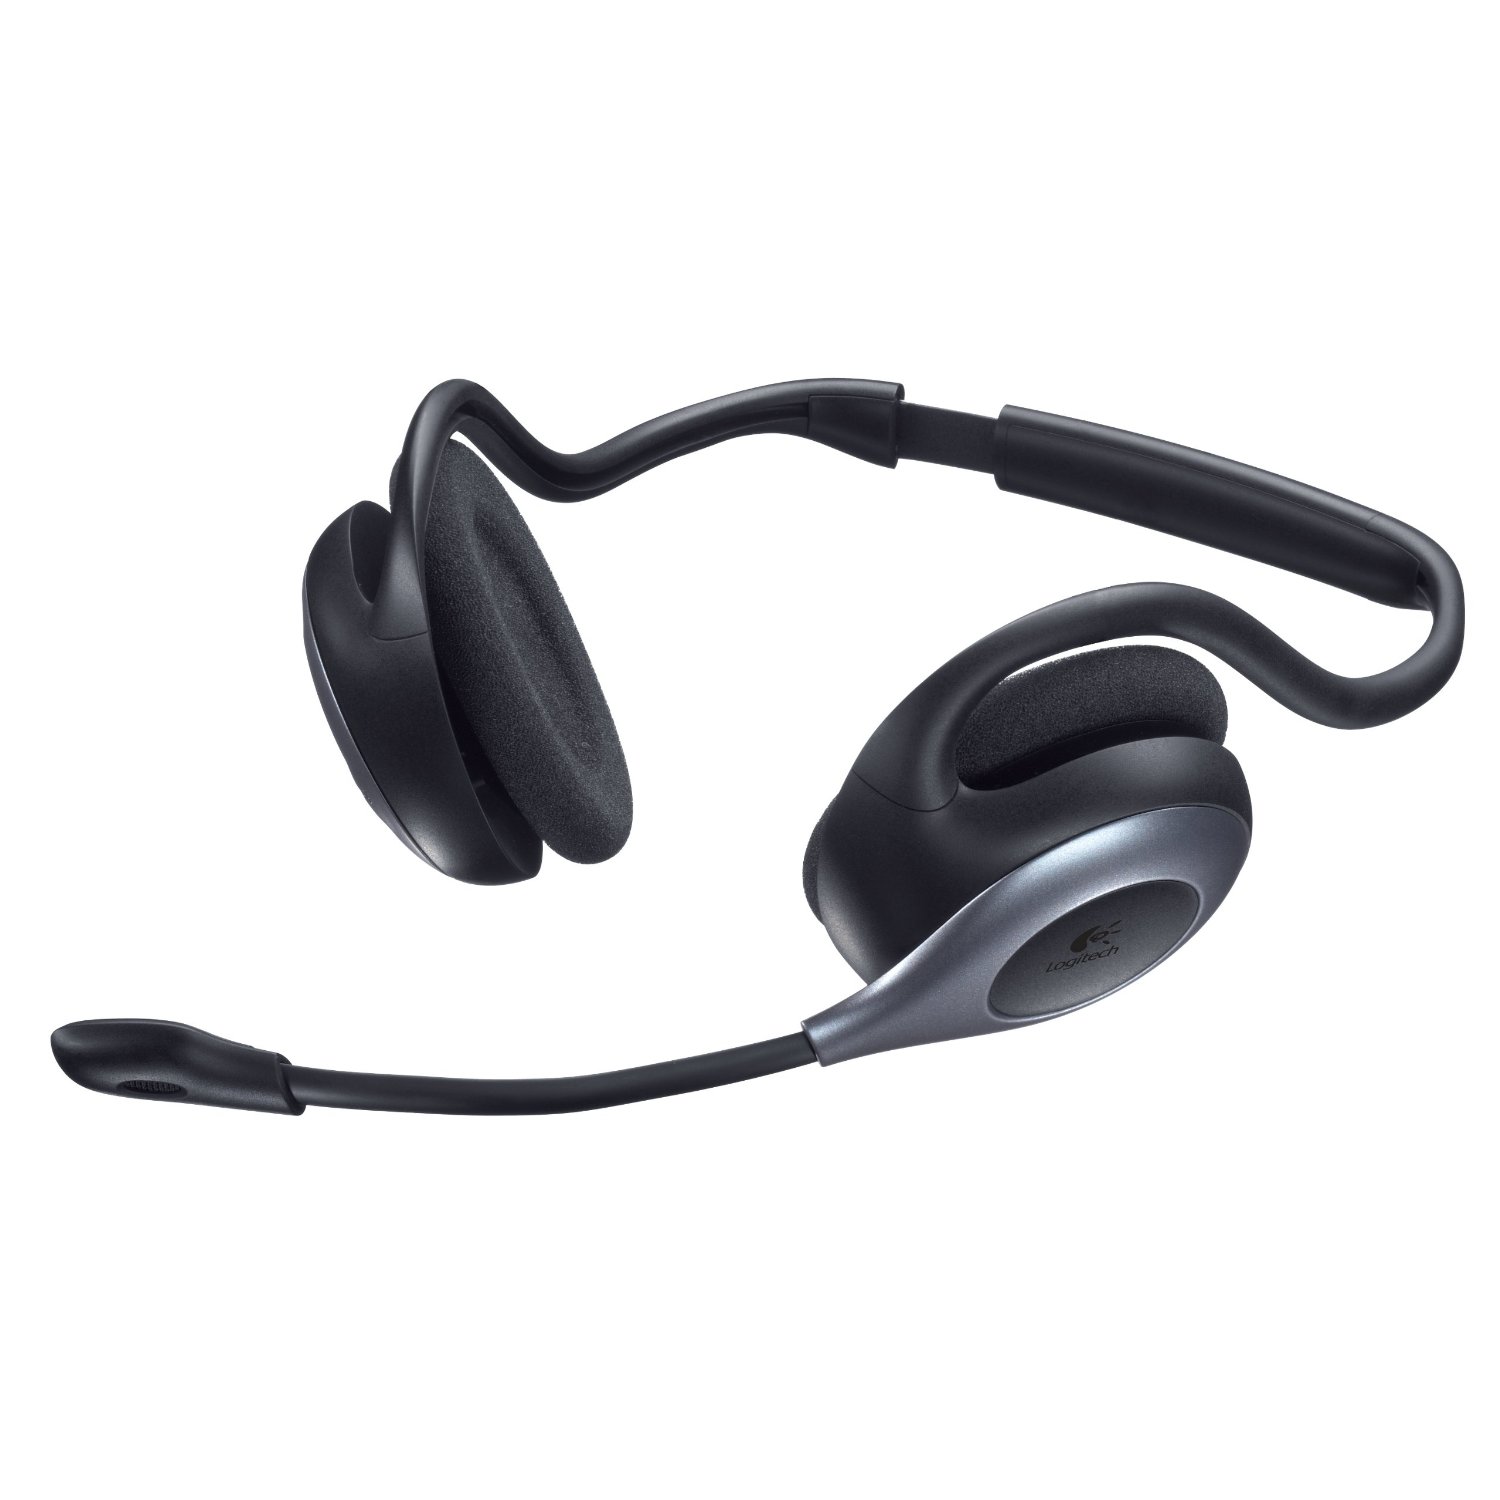 http://thetechjournal.com/wp-content/uploads/images/1109/1316776960-logitech-wireless-headset-h760-with-behindthehead-design--1.jpg